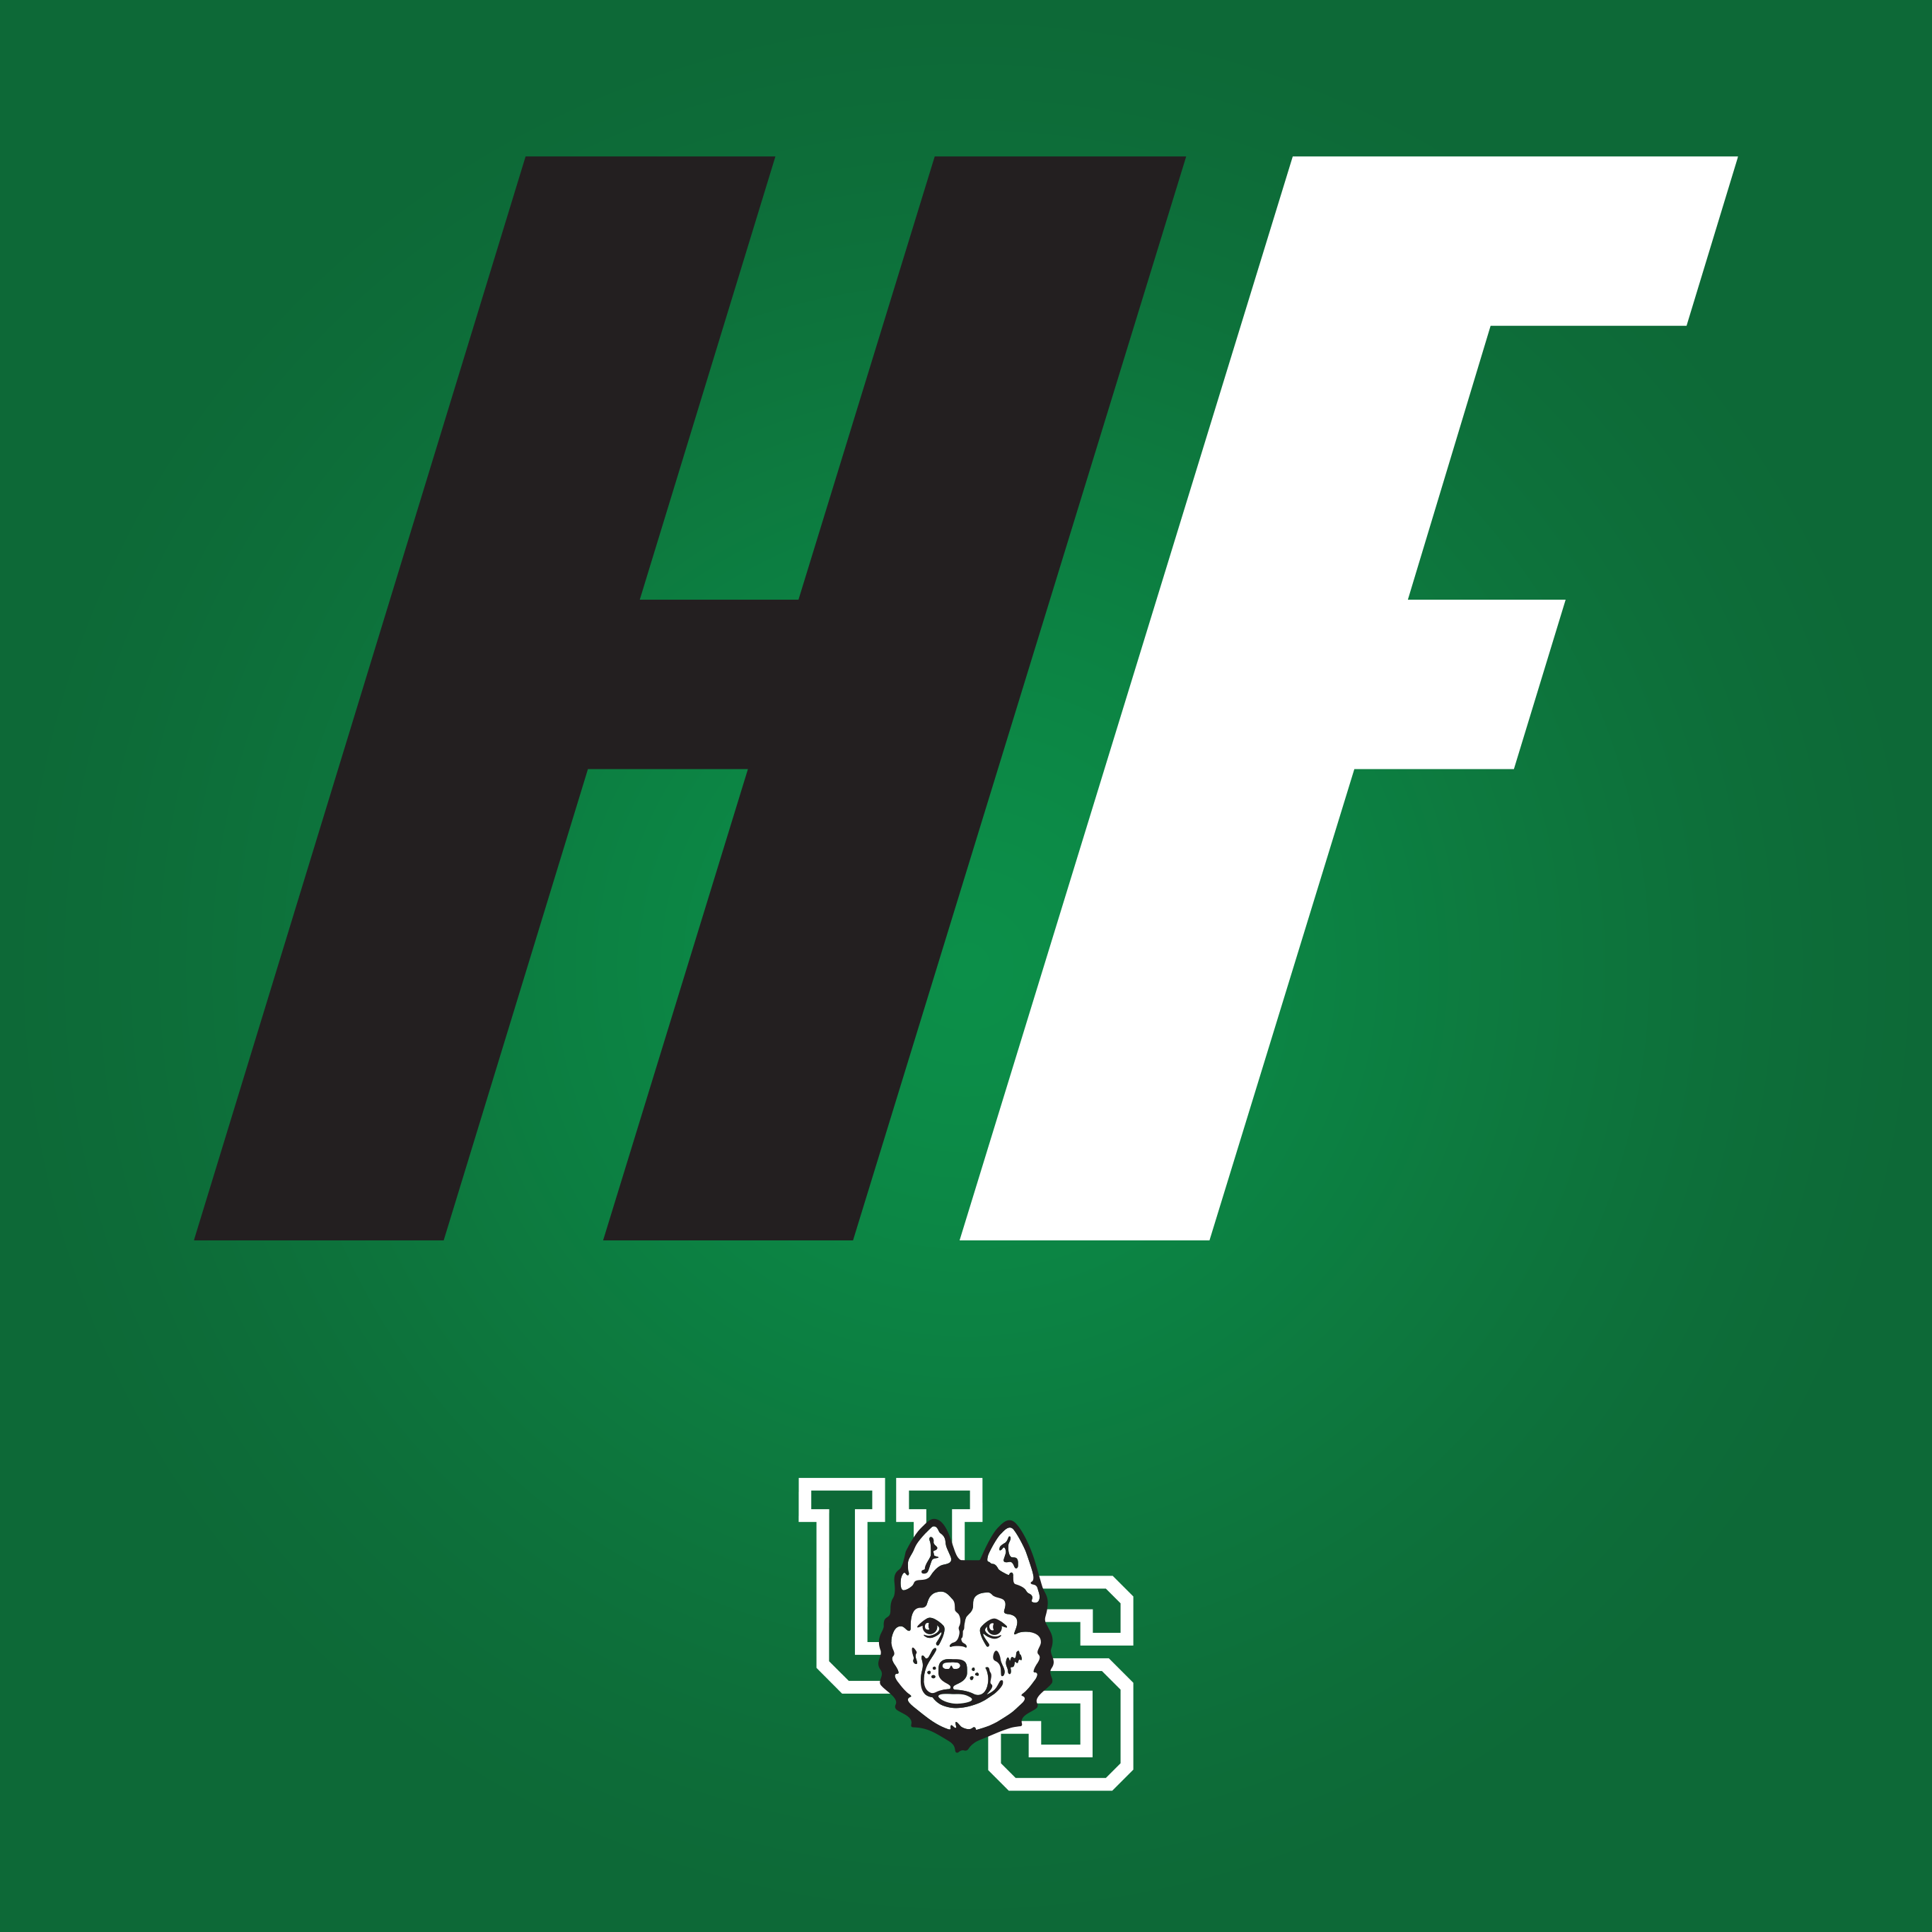 HuskieFAN Podcast – Coaches Show with Wray Morrison and Scott Flory Nov 10